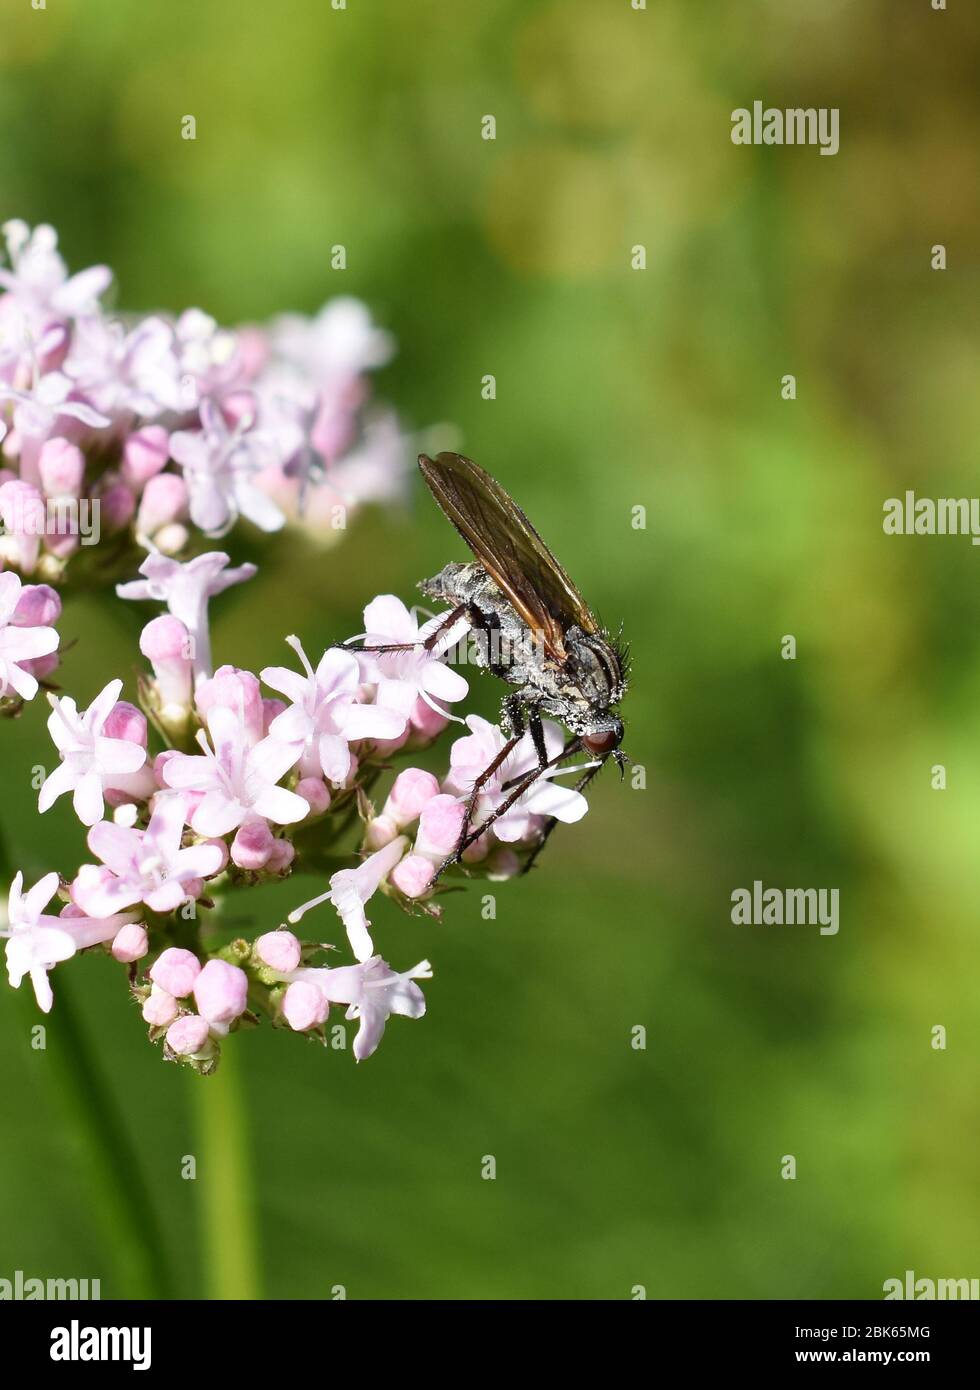 The dance fly Empis tesselata using its long proboscis to feed on flower Stock Photo